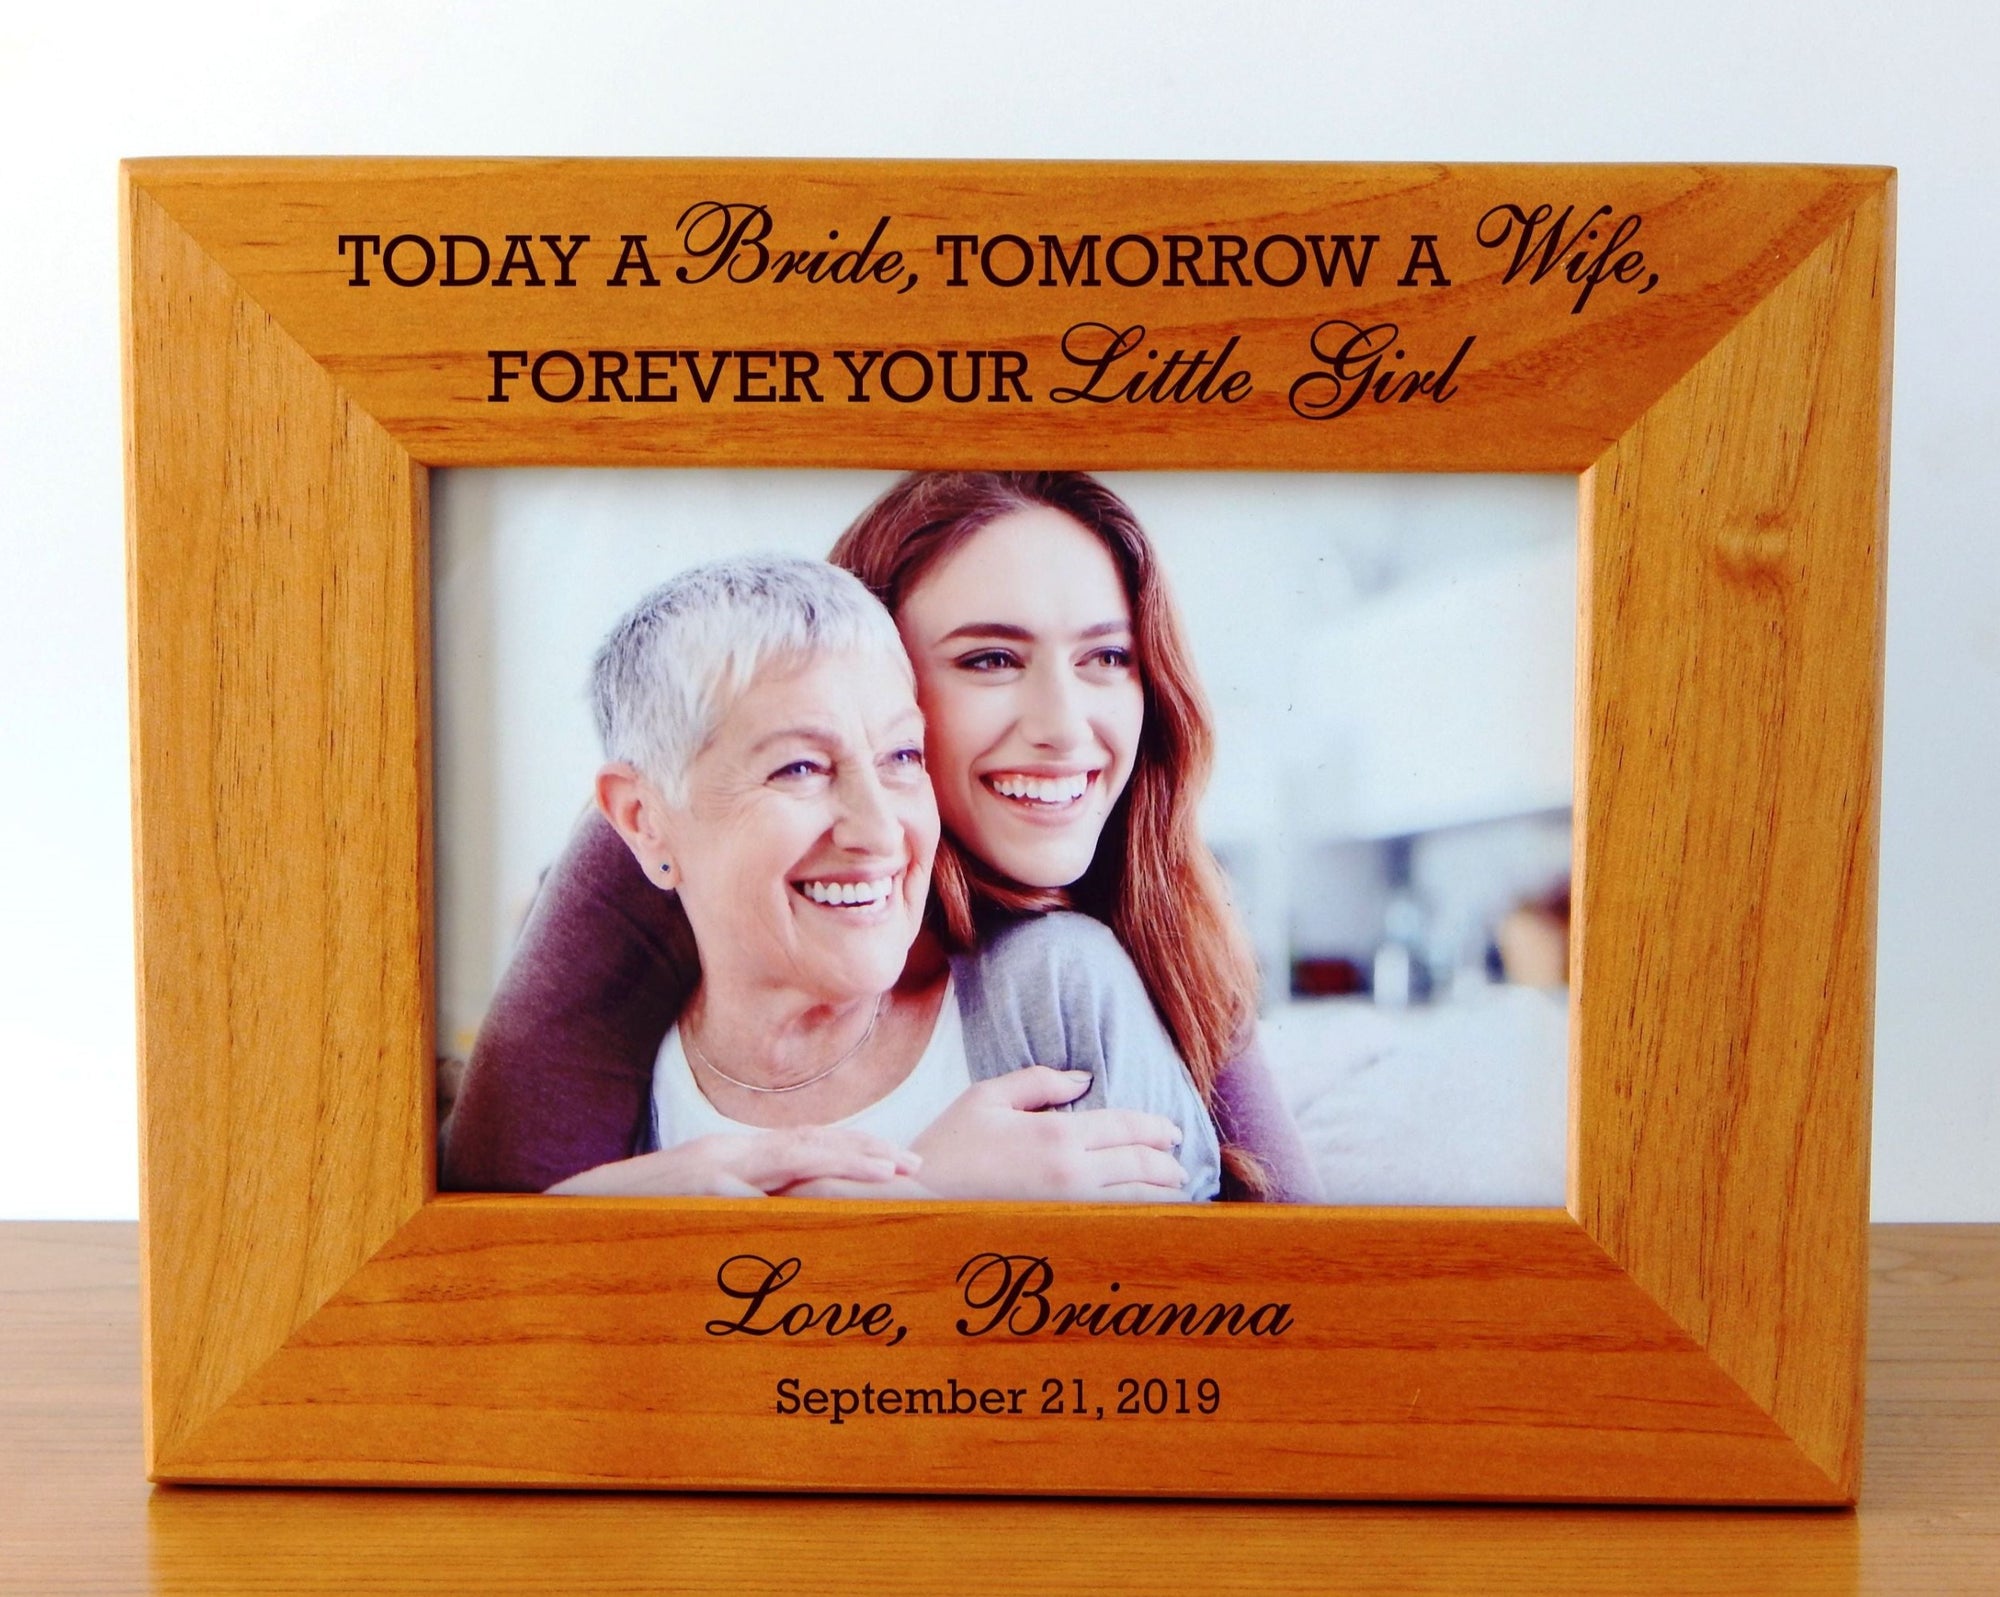 Personalized Picture Frame | Mother of the Bride Gift | Engraved Wedding Frames